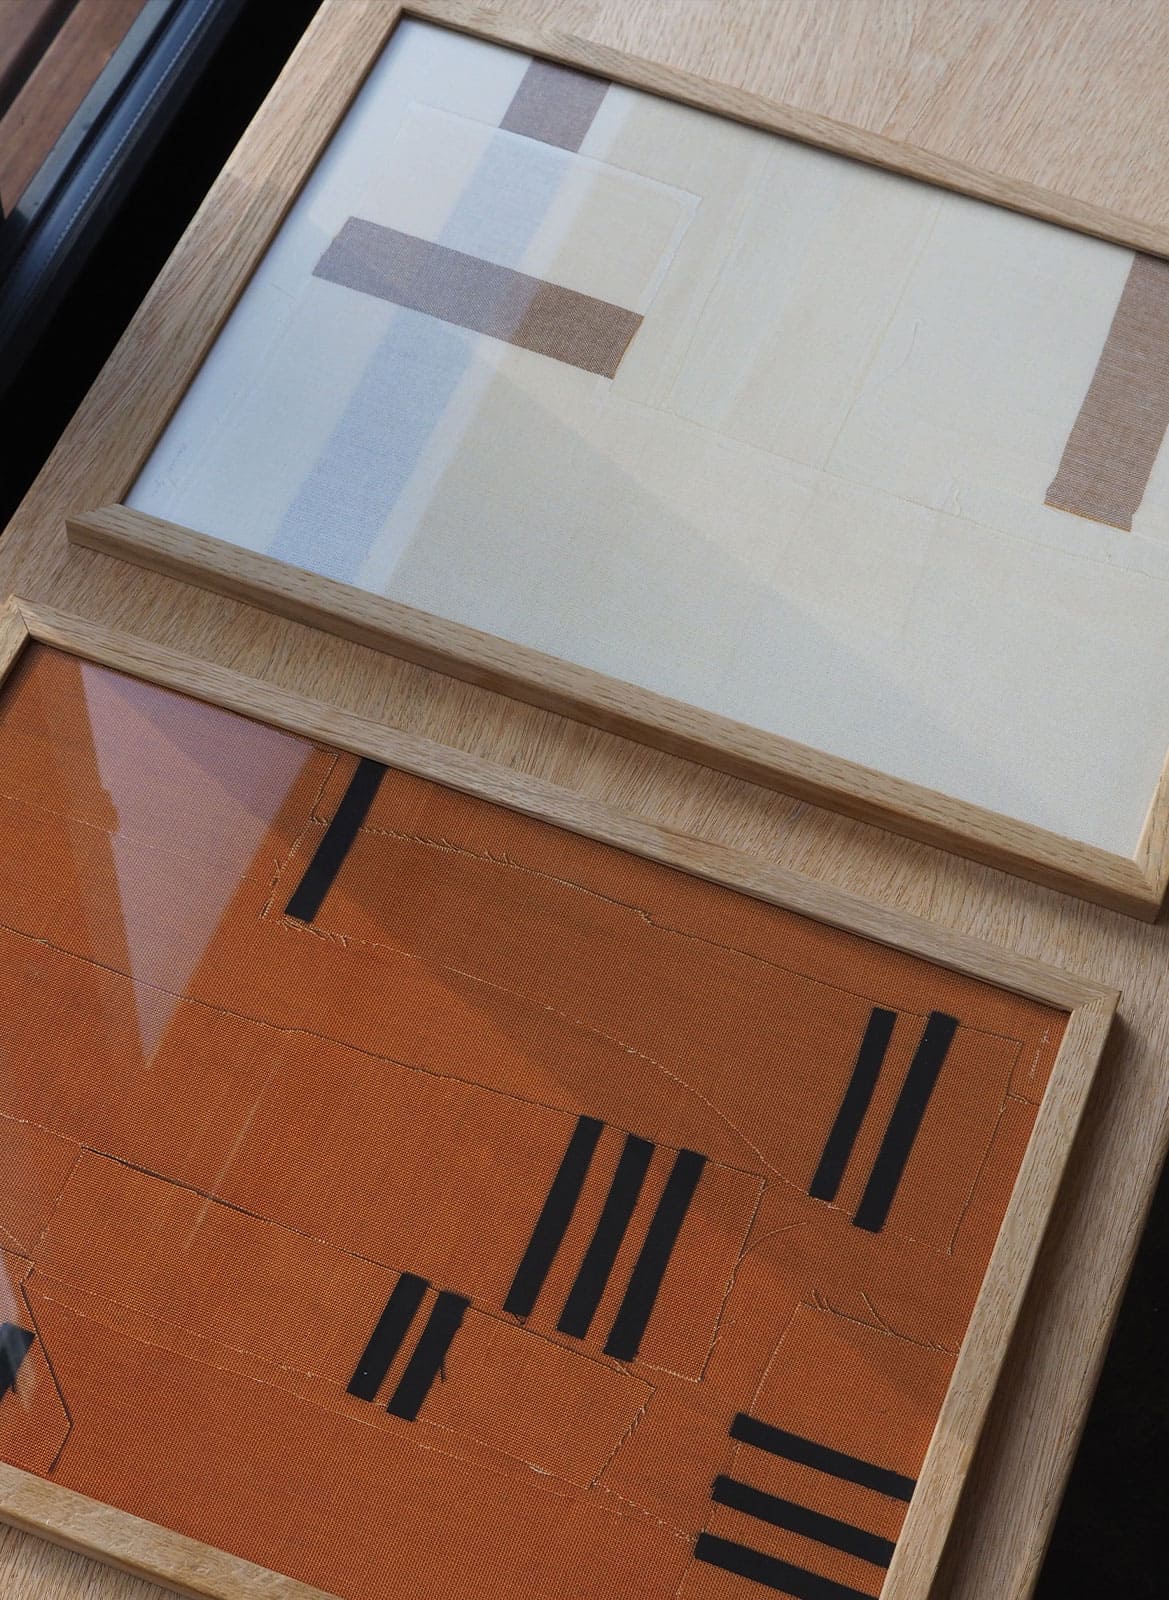 2 framed art pieces laying on a wooden bench by Atelier Cph